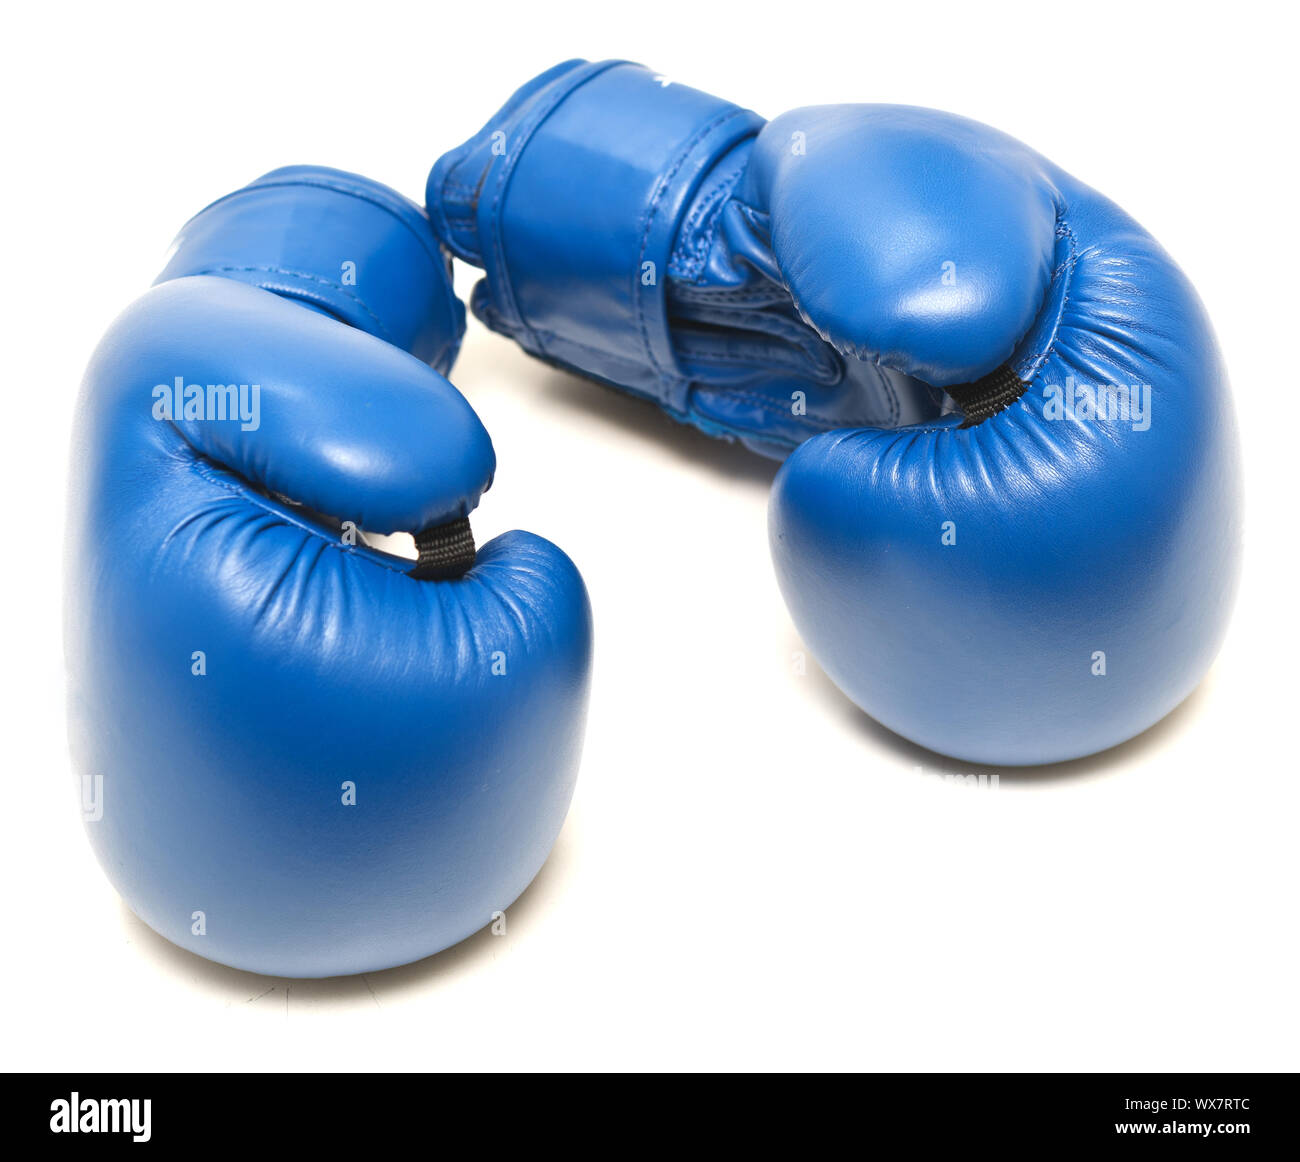 Boxing gloves Stock Photo